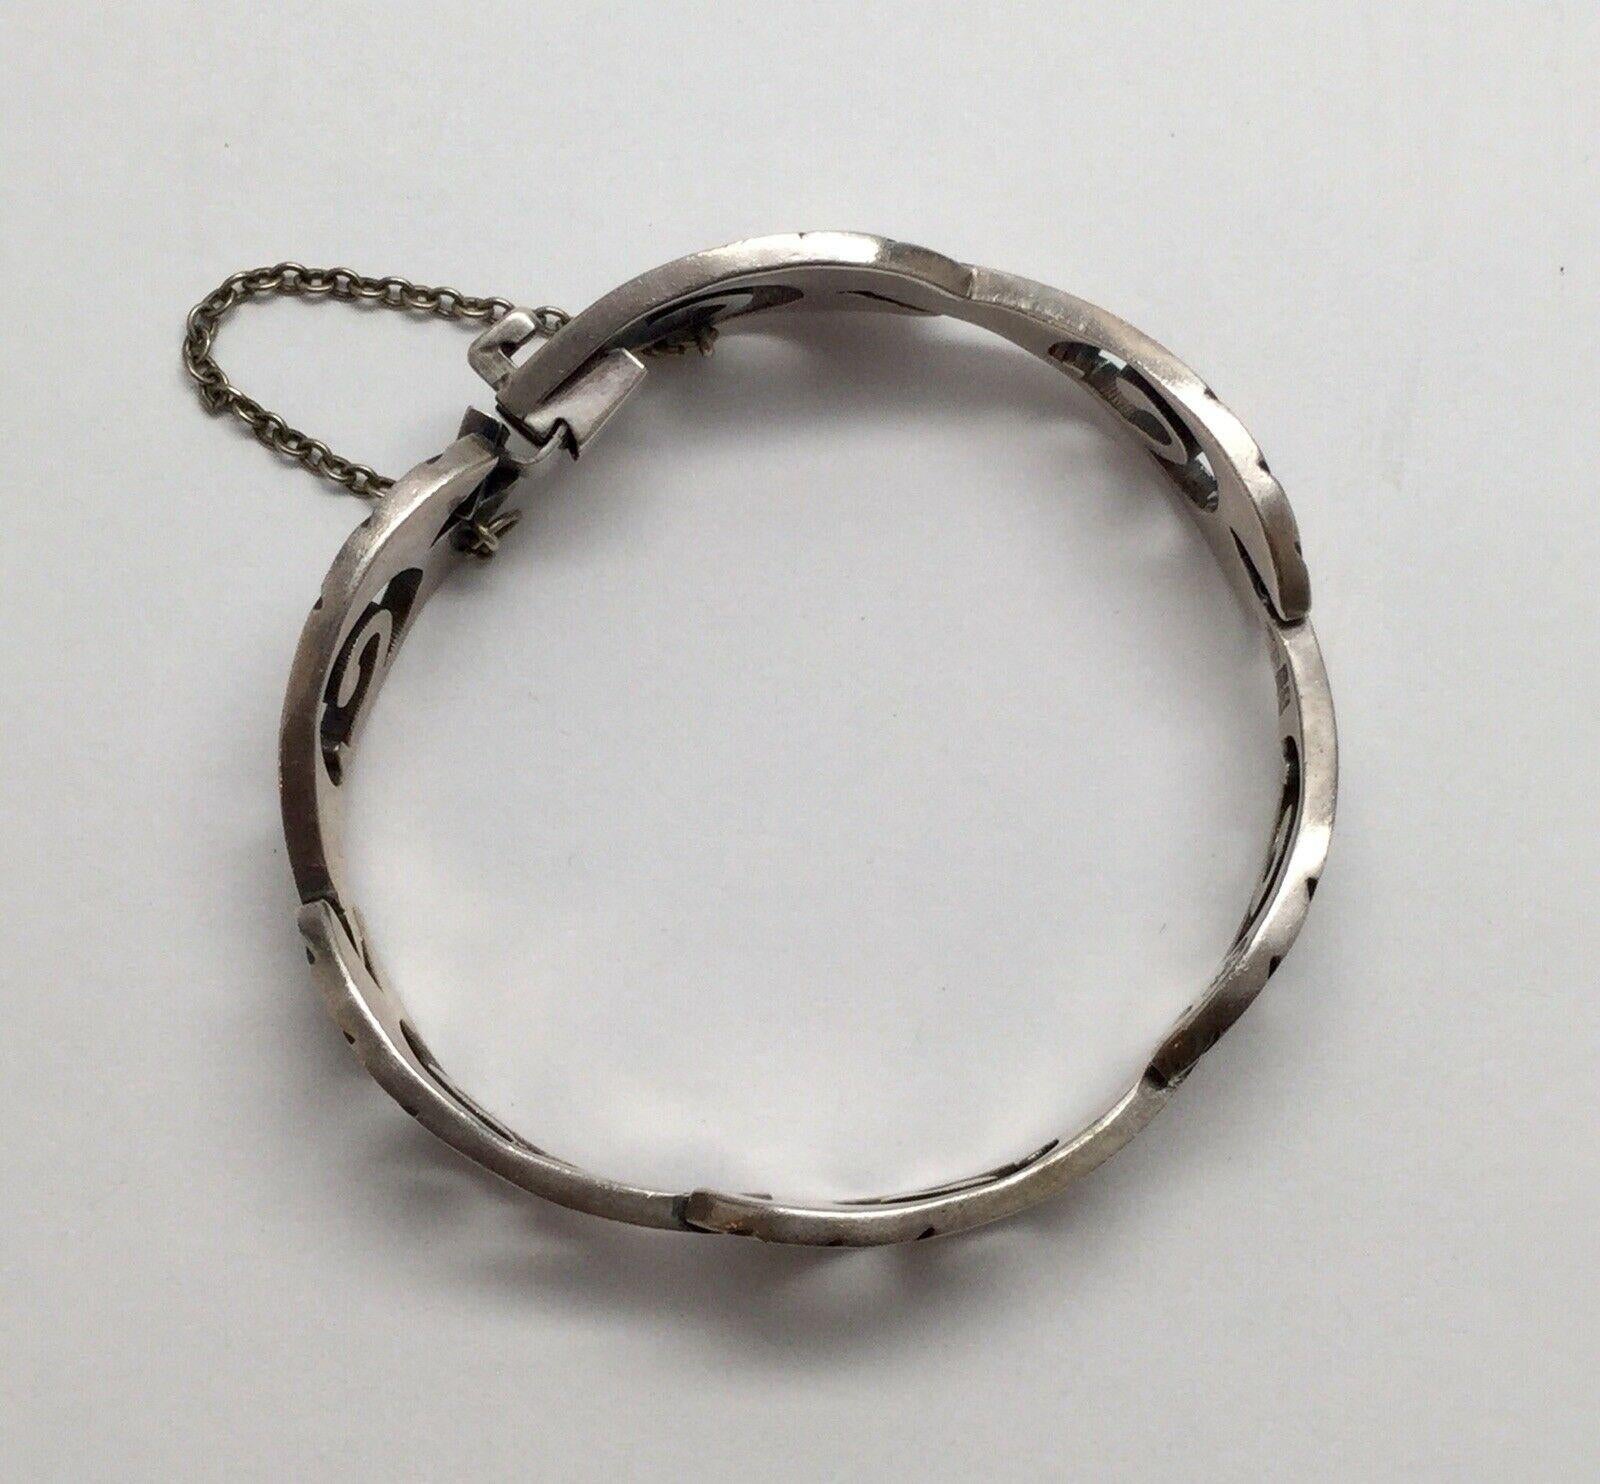 Taxco Mexico sterling silver cut out oxidized swirl design link bracelet with safety chain by JJ.

Marked: JJ Sterling Taxco, Eagle 3

Measures: 7 1/4